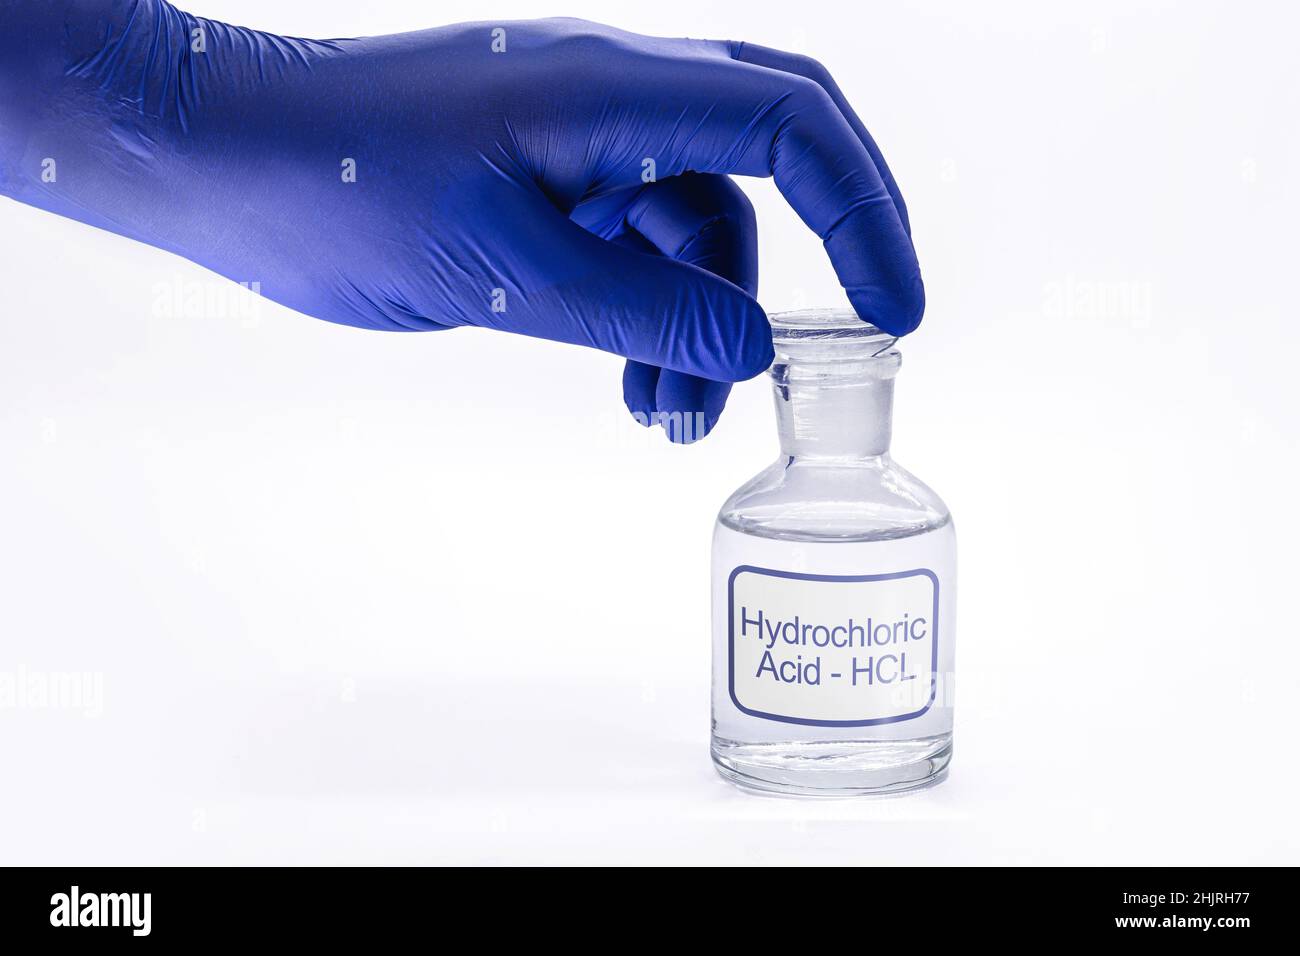 bottle of hydrochloric acid, handling with glove for chemist, chemical solution used in the industry in general, toxic and dangerous product Stock Photo